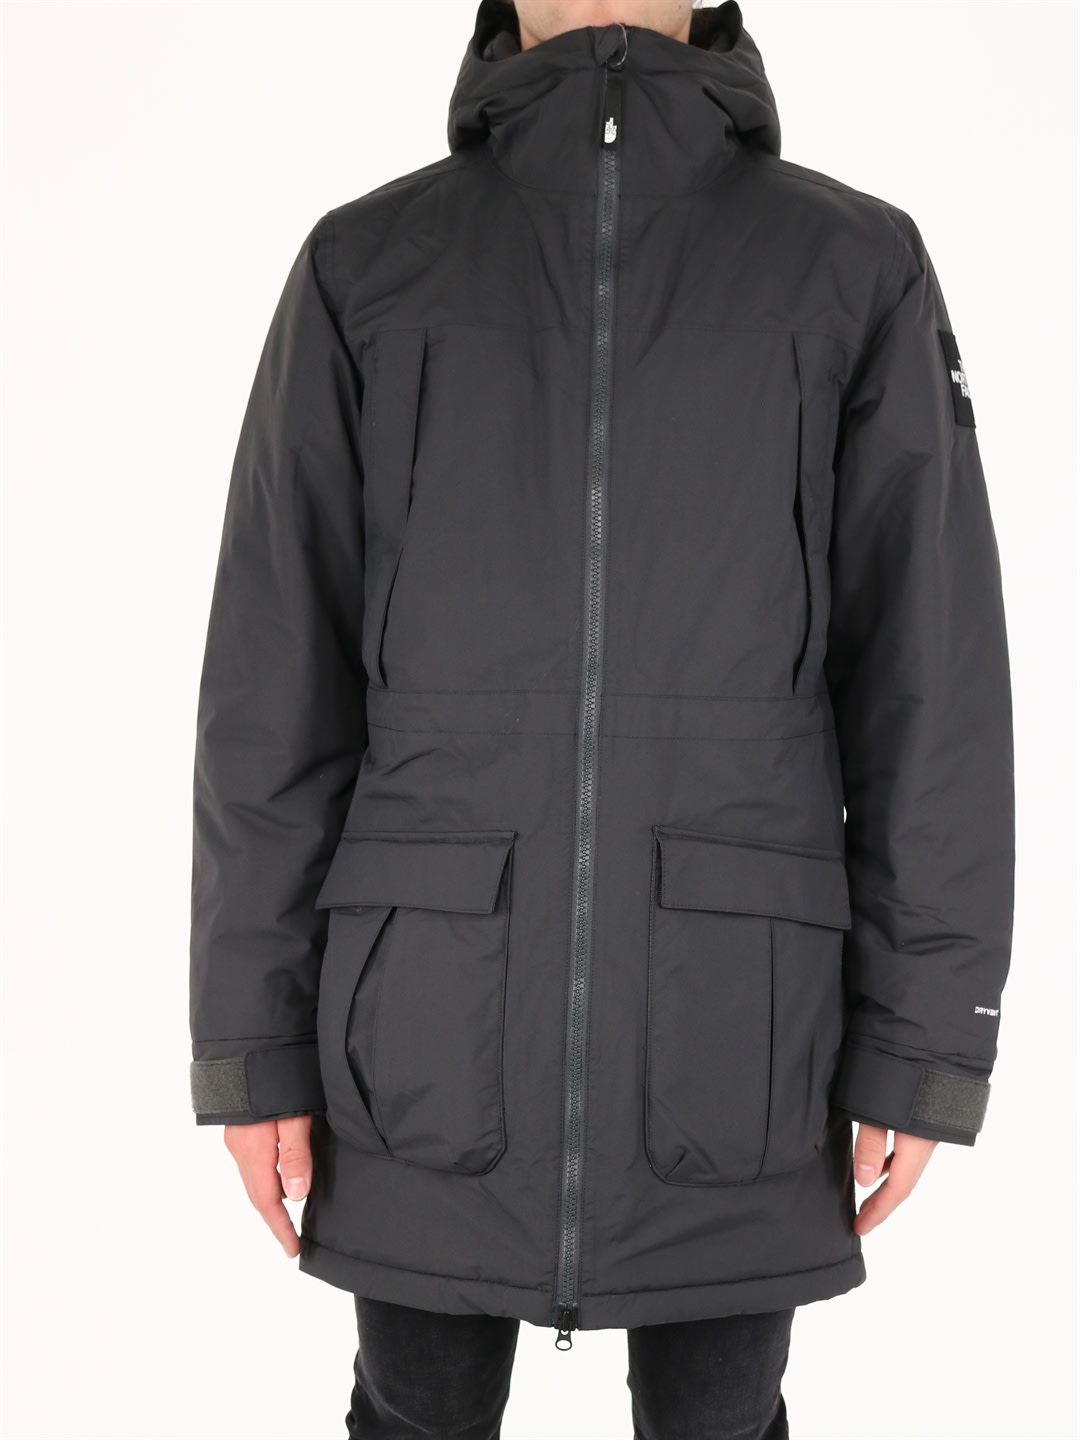 THE NORTH FACE STORM PEAK JACKET GRAY,11623281